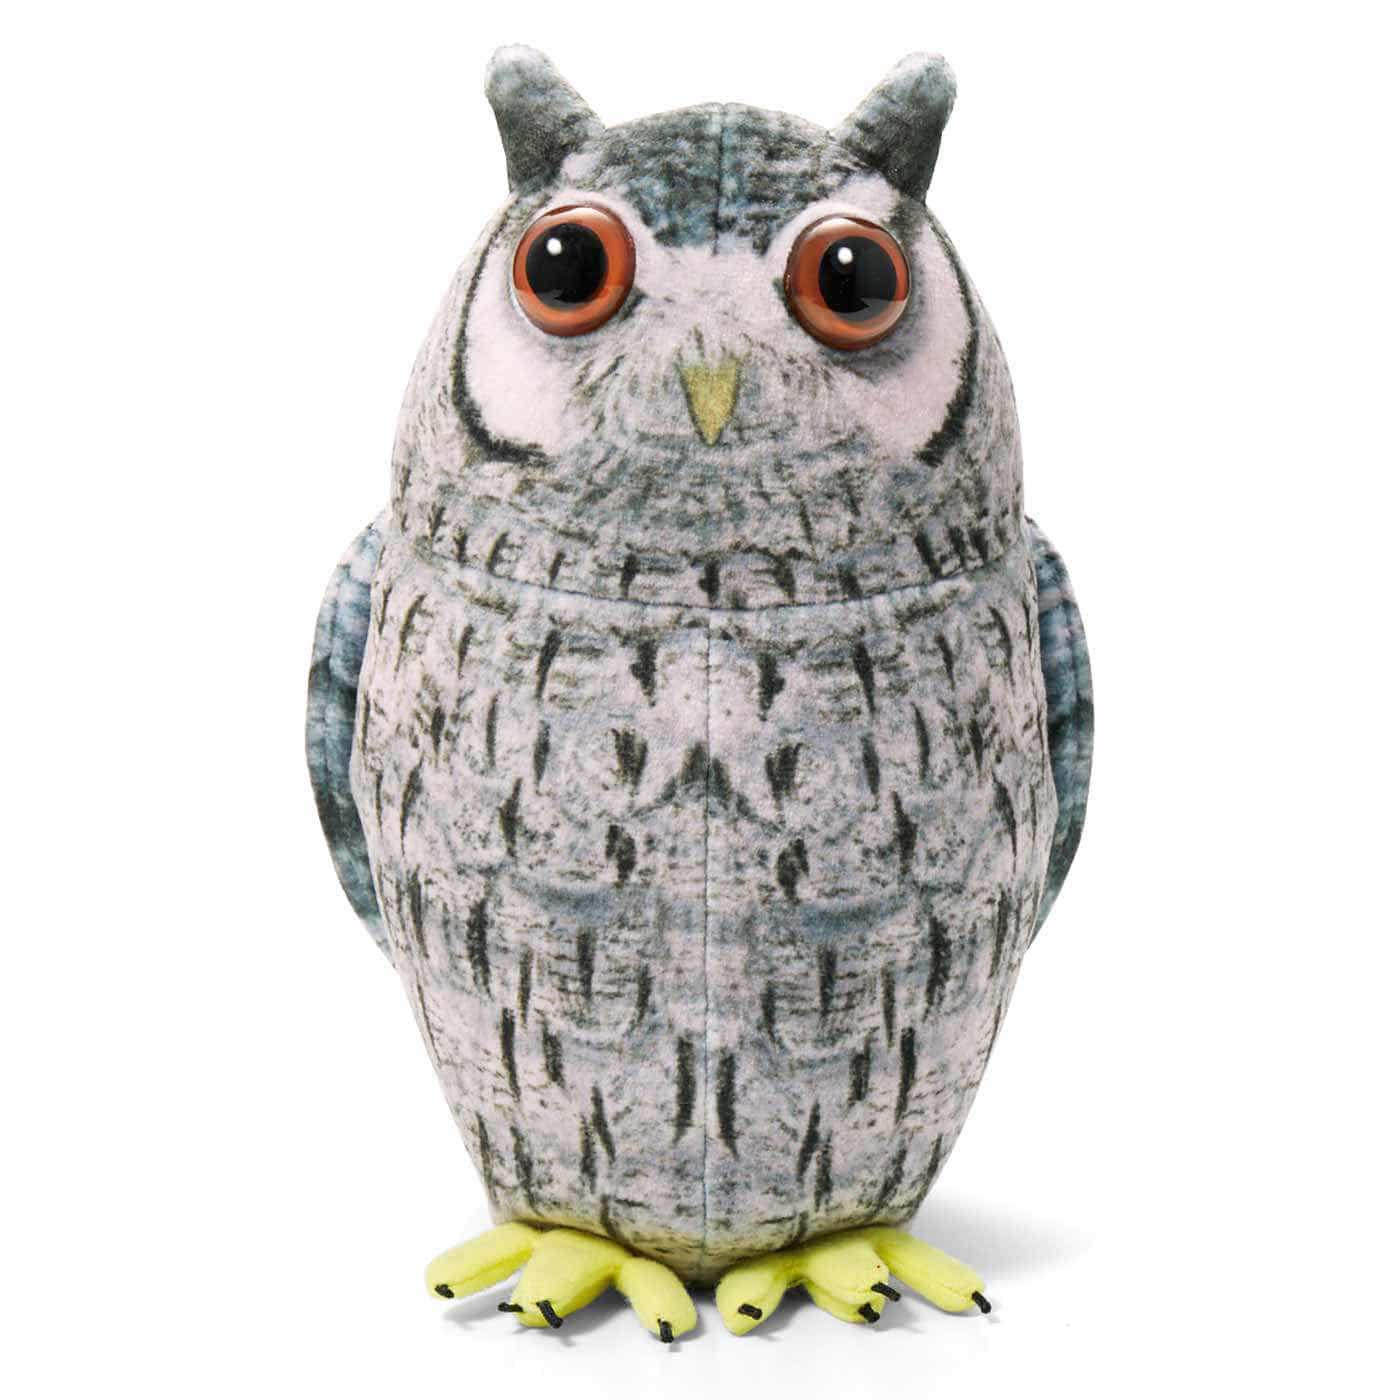 [You+More!] Magician's Little Friend Cute Owl small pouch series กระเป๋าใส่อุปกรณ์ลายนกเค้าแมว (Northern white-faced owl)